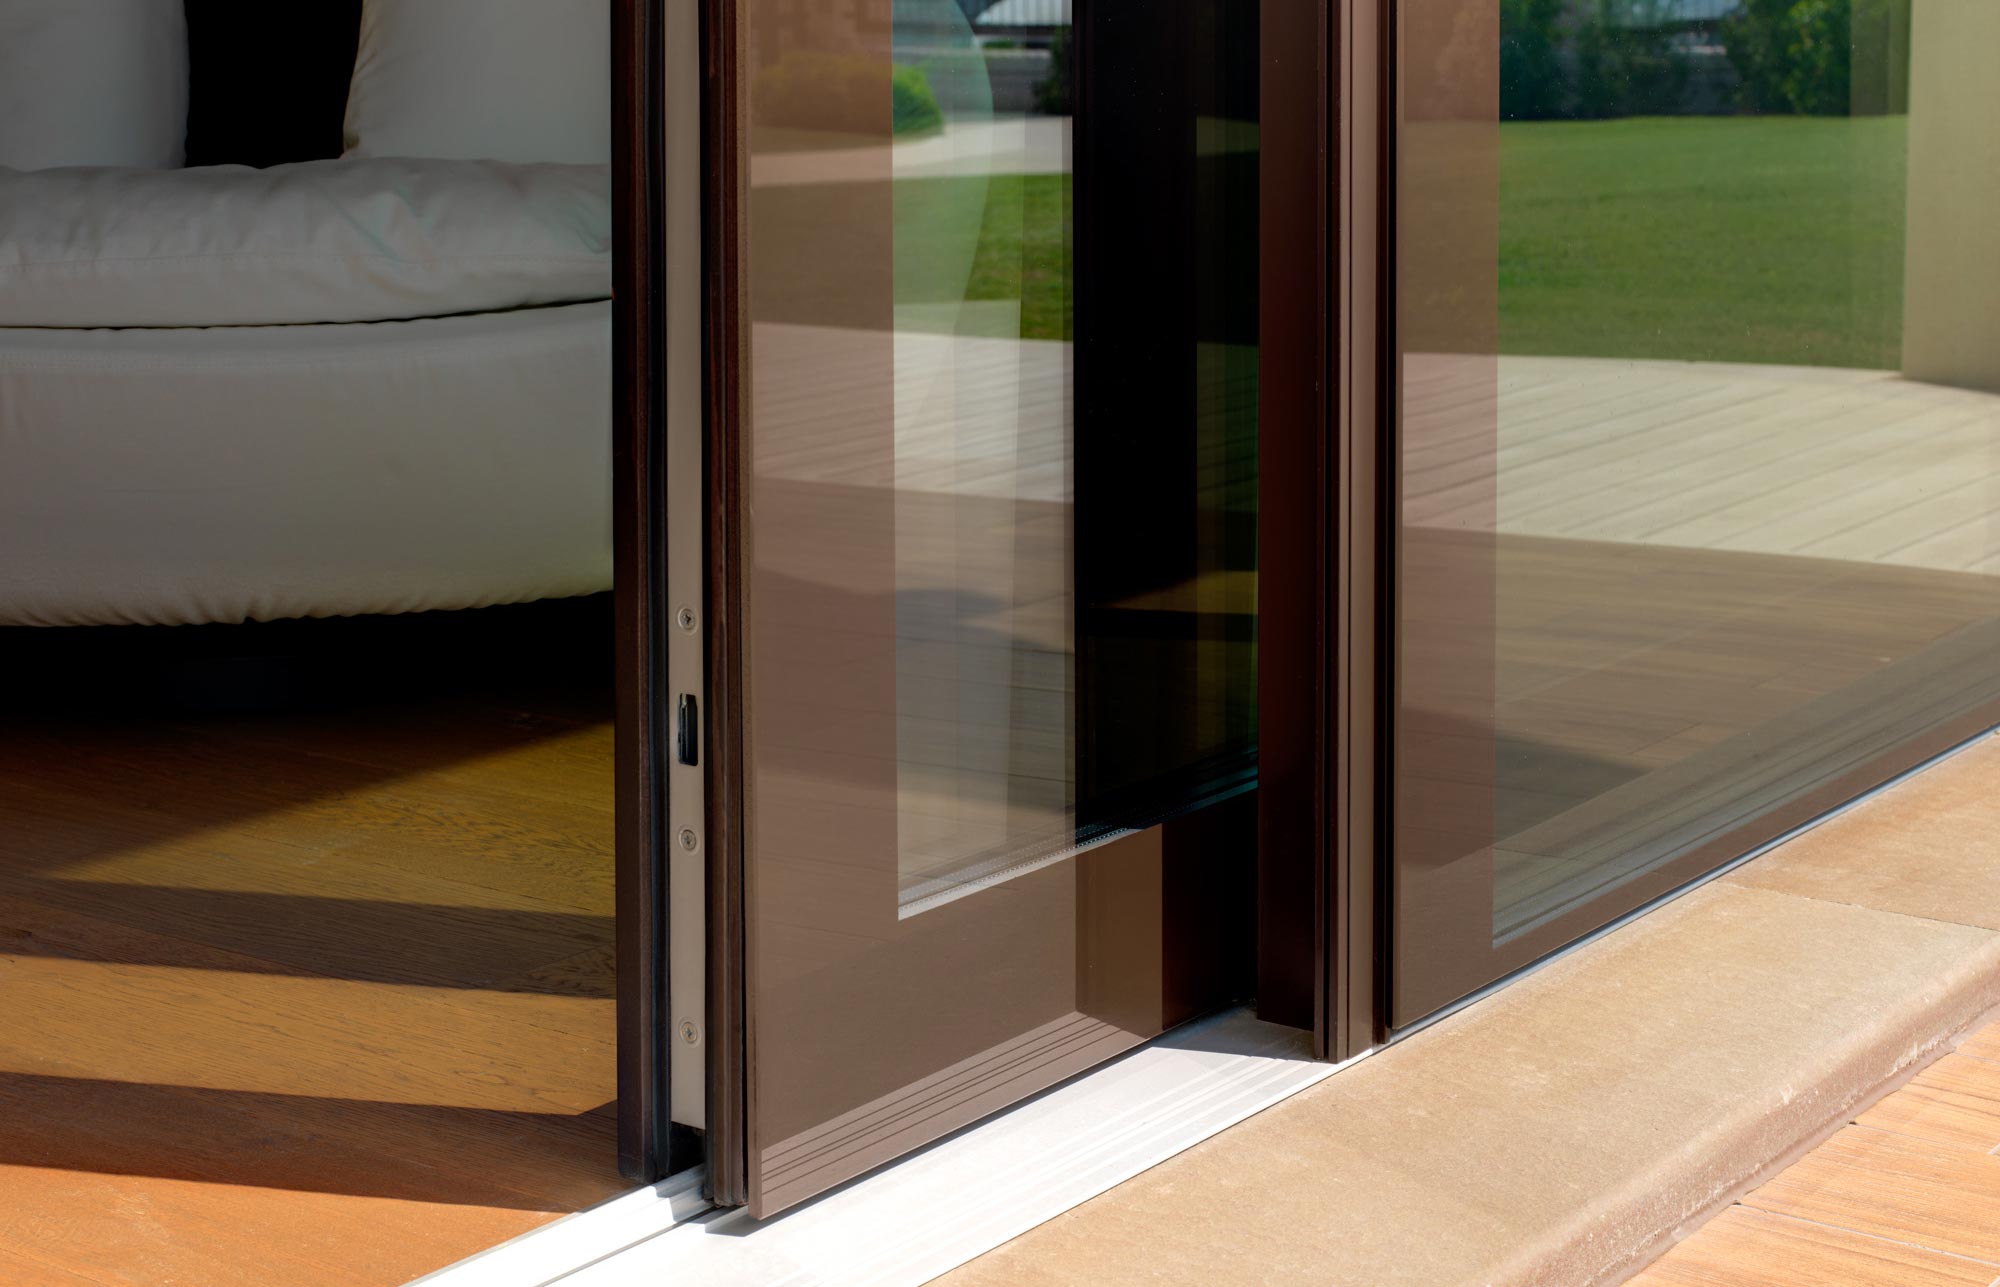 External view of a sliding door with Vitrum Double system